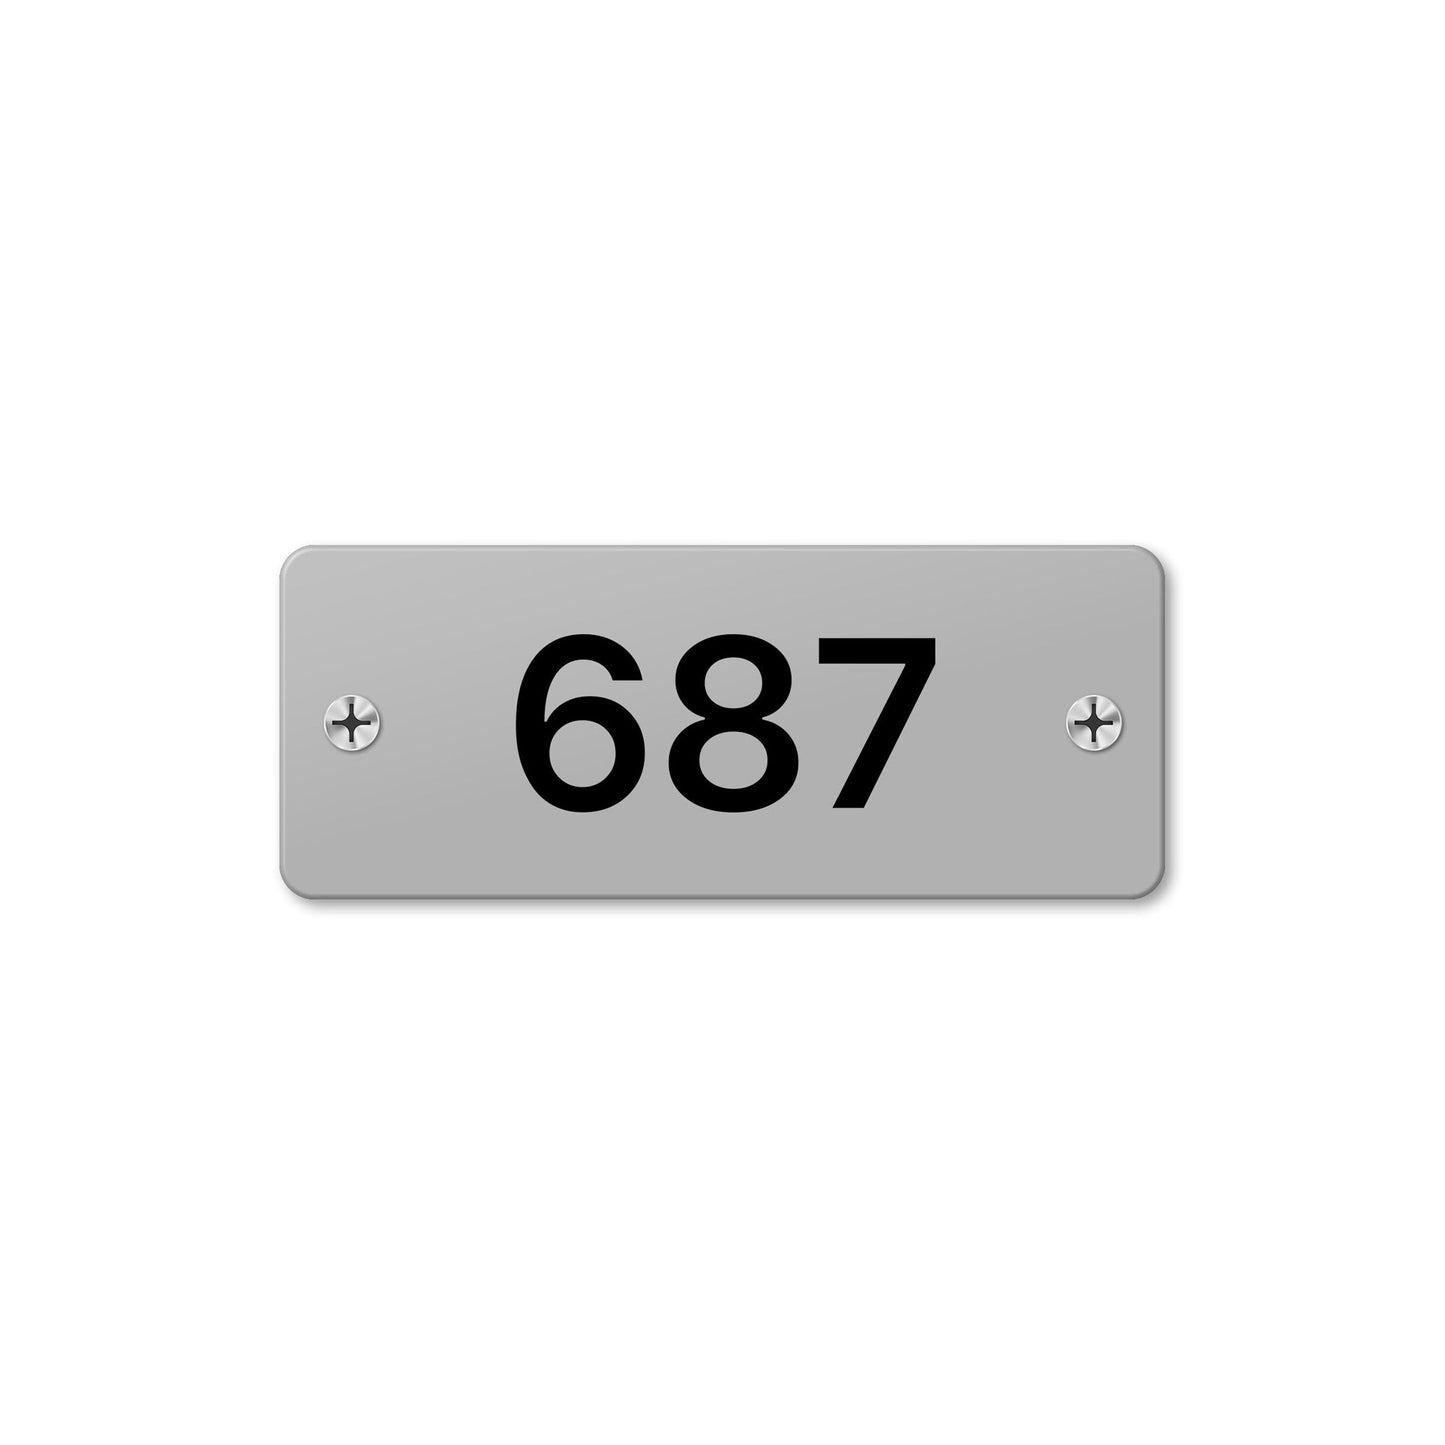 Numeral 687